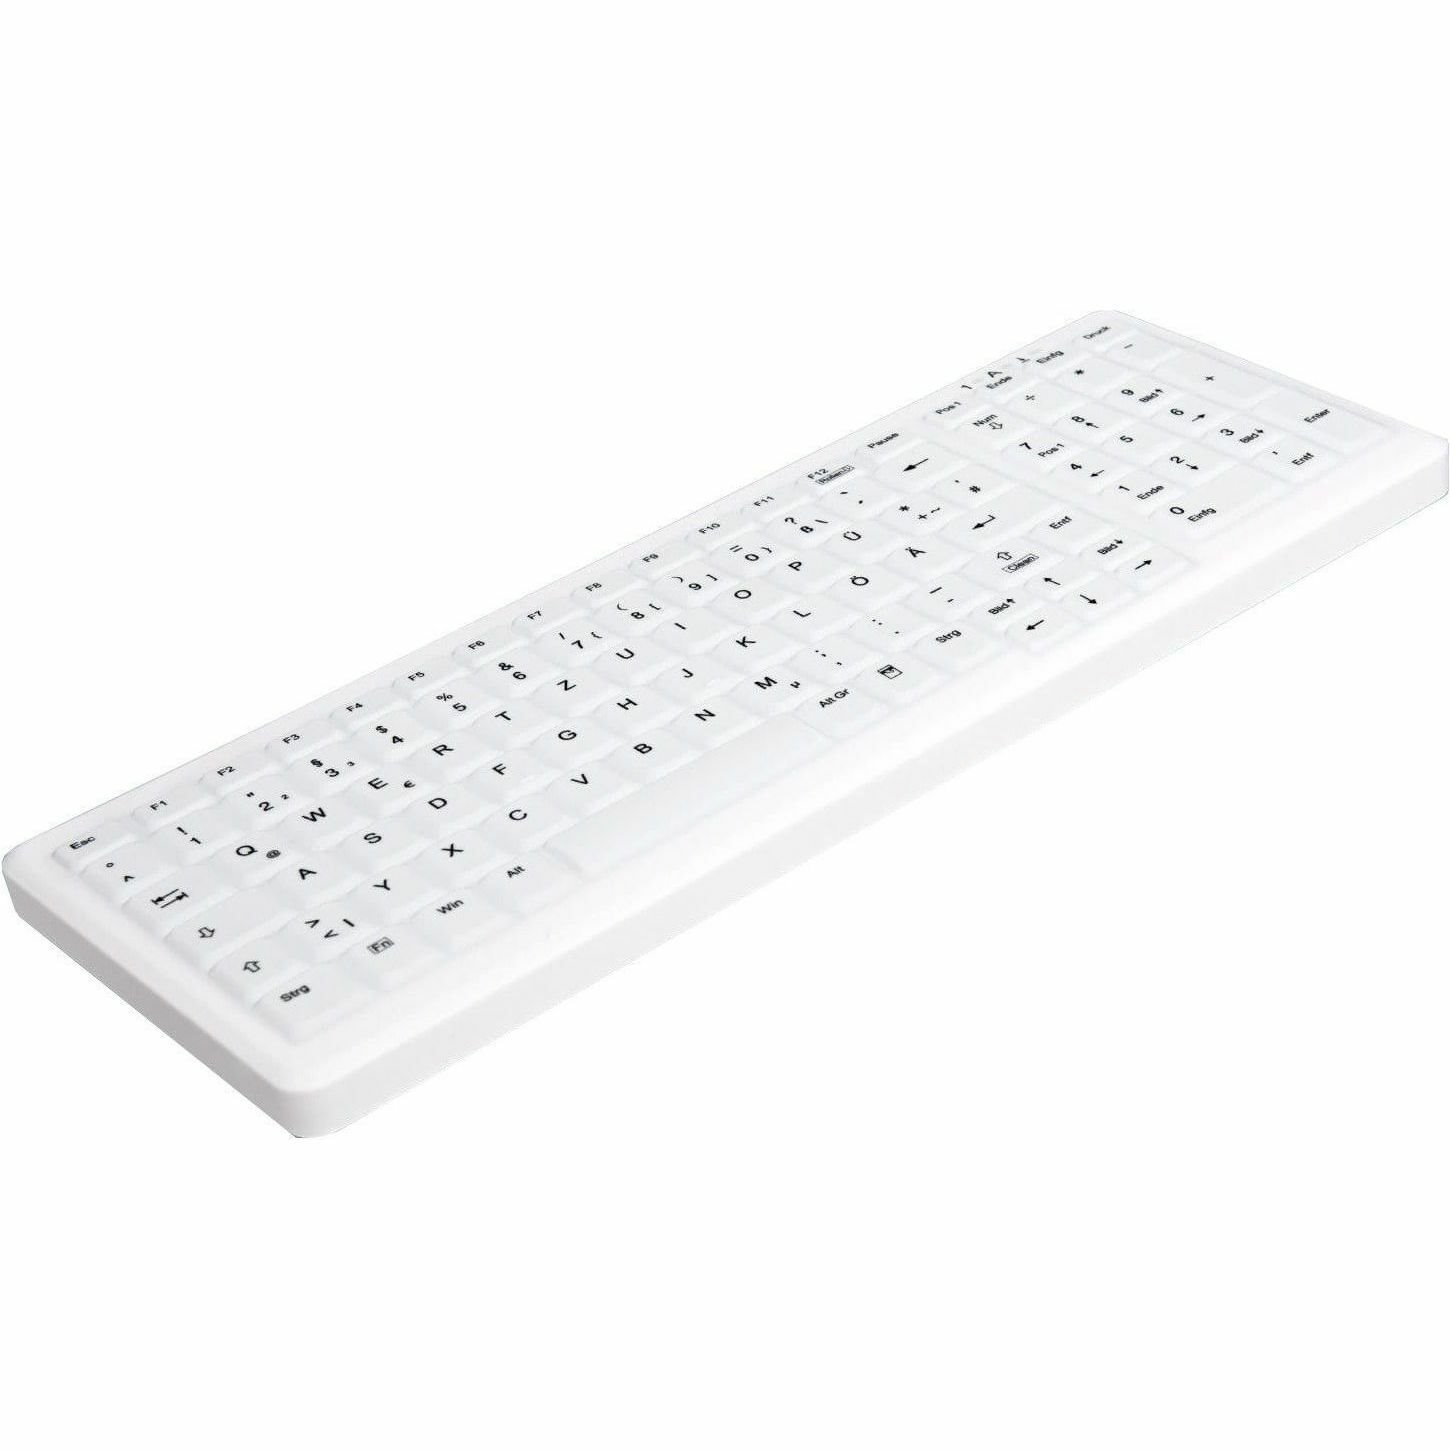 Active Key Keyboard - Wireless Connectivity - USB 1.1 Type A Interface - French - White